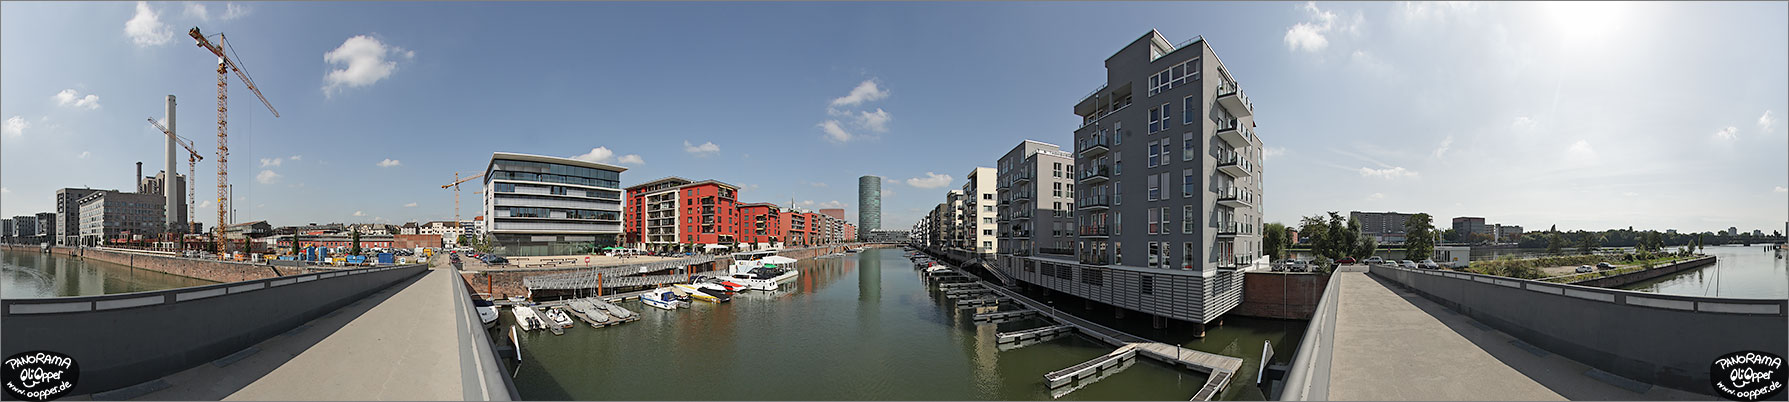 Panorama Frankfurt am Main - Westhafen - p1122 - (c) by Oliver Opper